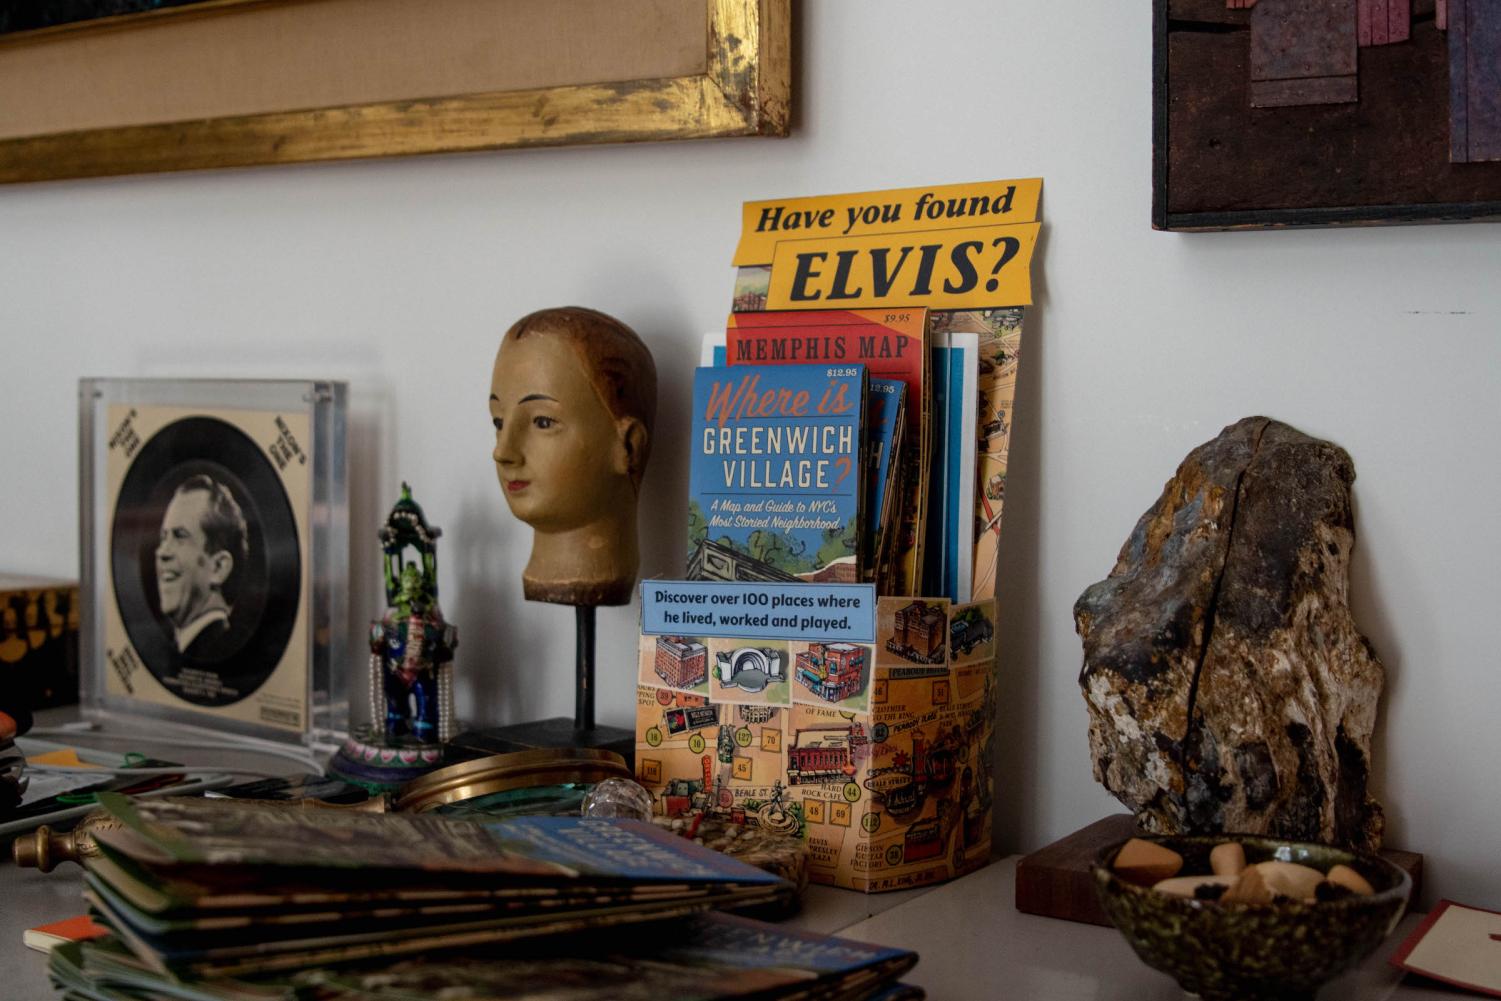 A close-up shot of a group of decorations in Grossman's studio atop a table, framed against a white wall. It includes photographs, maps, framed artwork and figurines.